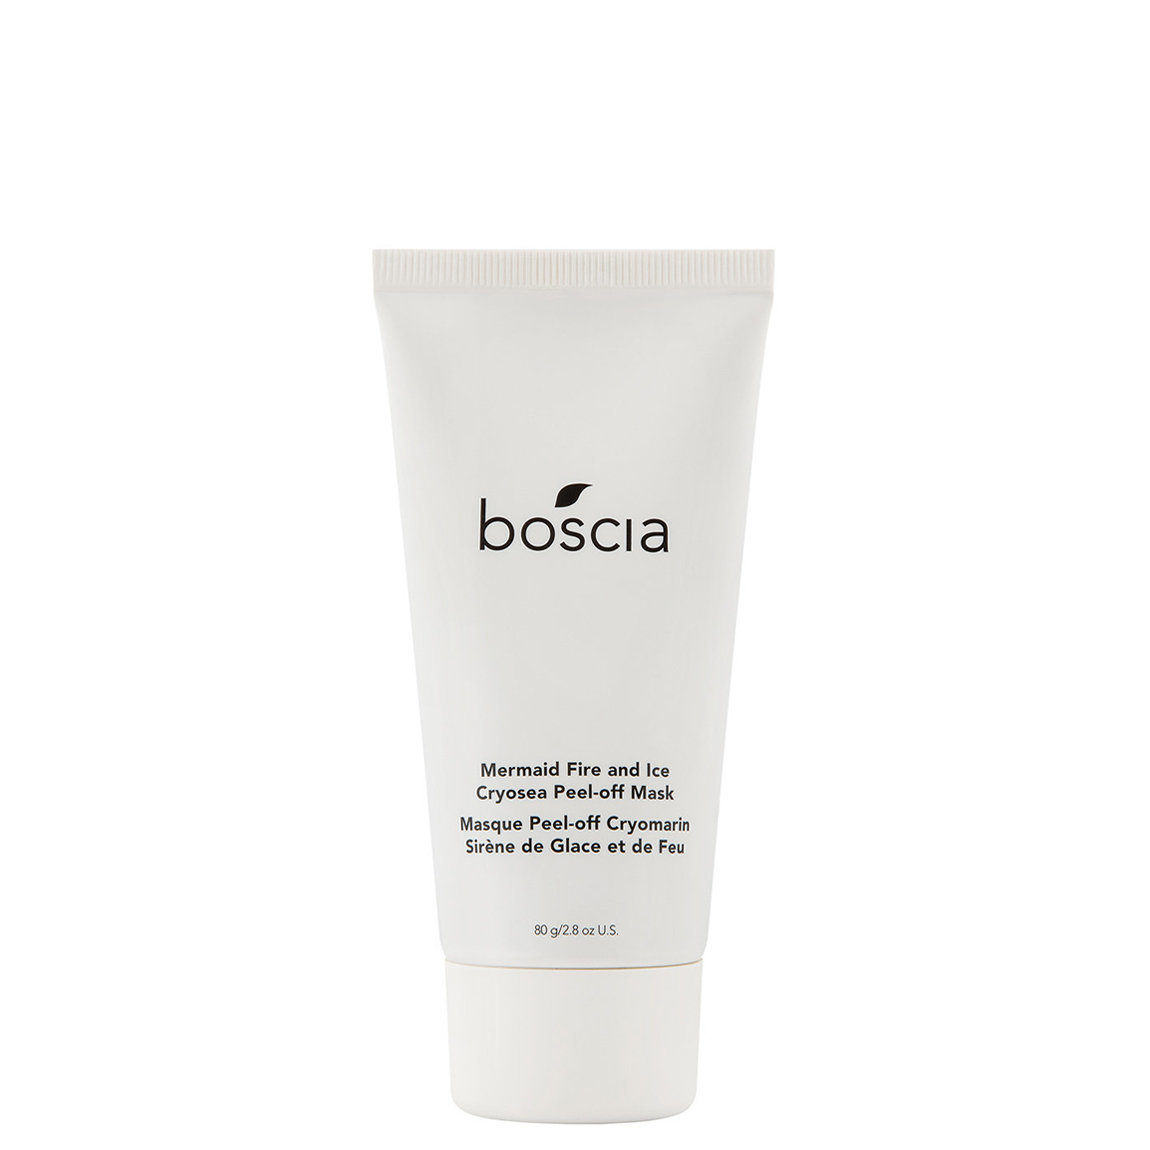 boscia Cryosea Mermaid Fire and Ice Peel-Off Mask alternative view 1 - product swatch.